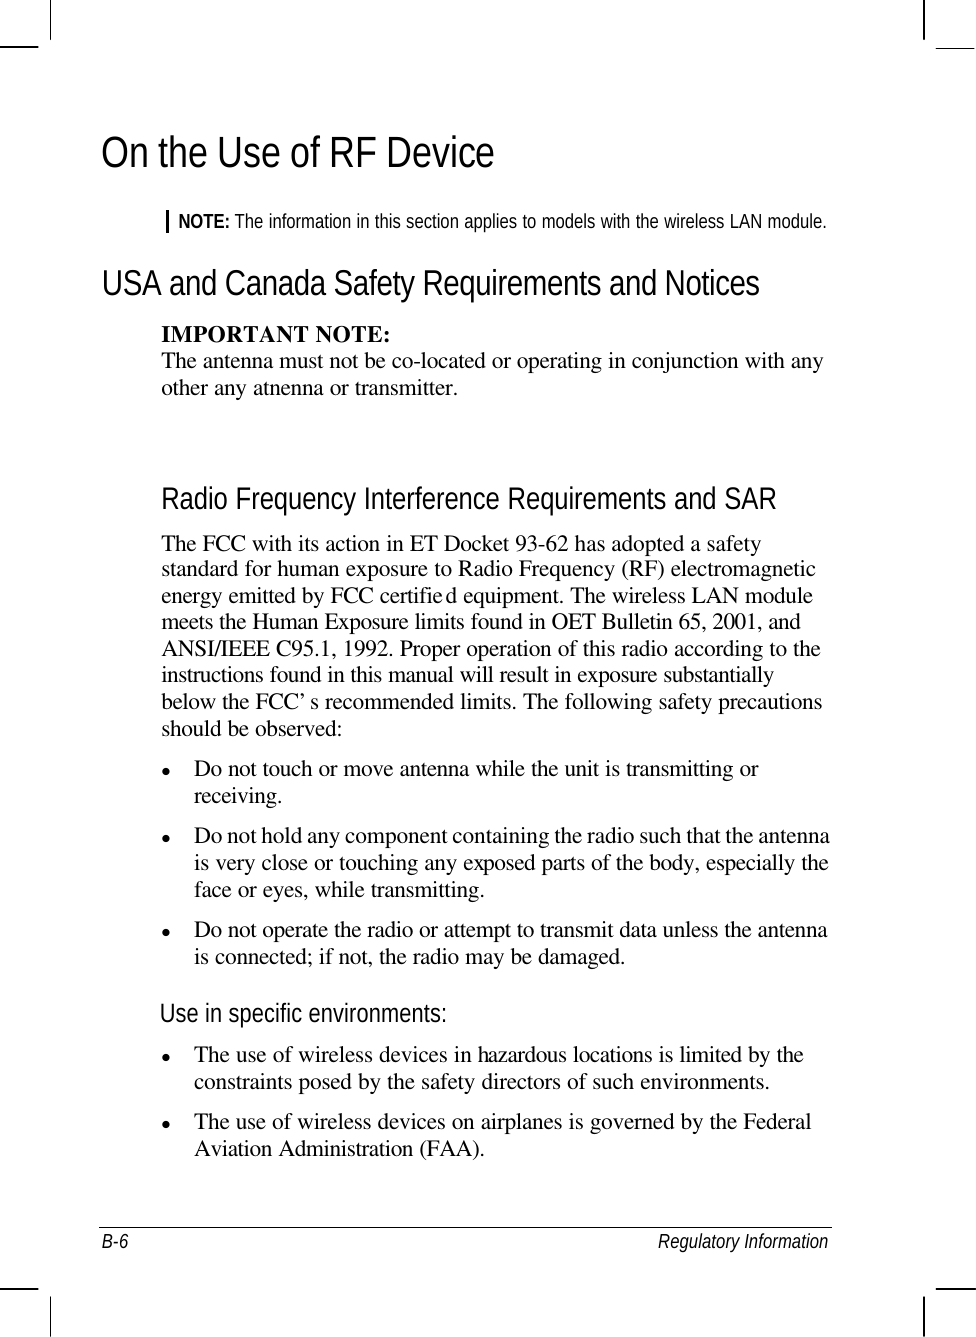  B-6 Regulatory Information On the Use of RF Device NOTE: The information in this section applies to models with the wireless LAN module. USA and Canada Safety Requirements and Notices IMPORTANT NOTE: The antenna must not be co-located or operating in conjunction with any   other any atnenna or transmitter.  Radio Frequency Interference Requirements and SAR The FCC with its action in ET Docket 93-62 has adopted a safety standard for human exposure to Radio Frequency (RF) electromagnetic energy emitted by FCC certified equipment. The wireless LAN module meets the Human Exposure limits found in OET Bulletin 65, 2001, and ANSI/IEEE C95.1, 1992. Proper operation of this radio according to the instructions found in this manual will result in exposure substantially below the FCC’s recommended limits. The following safety precautions should be observed: l Do not touch or move antenna while the unit is transmitting or receiving. l Do not hold any component containing the radio such that the antenna is very close or touching any exposed parts of the body, especially the face or eyes, while transmitting. l Do not operate the radio or attempt to transmit data unless the antenna is connected; if not, the radio may be damaged. Use in specific environments: l The use of wireless devices in hazardous locations is limited by the constraints posed by the safety directors of such environments. l The use of wireless devices on airplanes is governed by the Federal Aviation Administration (FAA). 